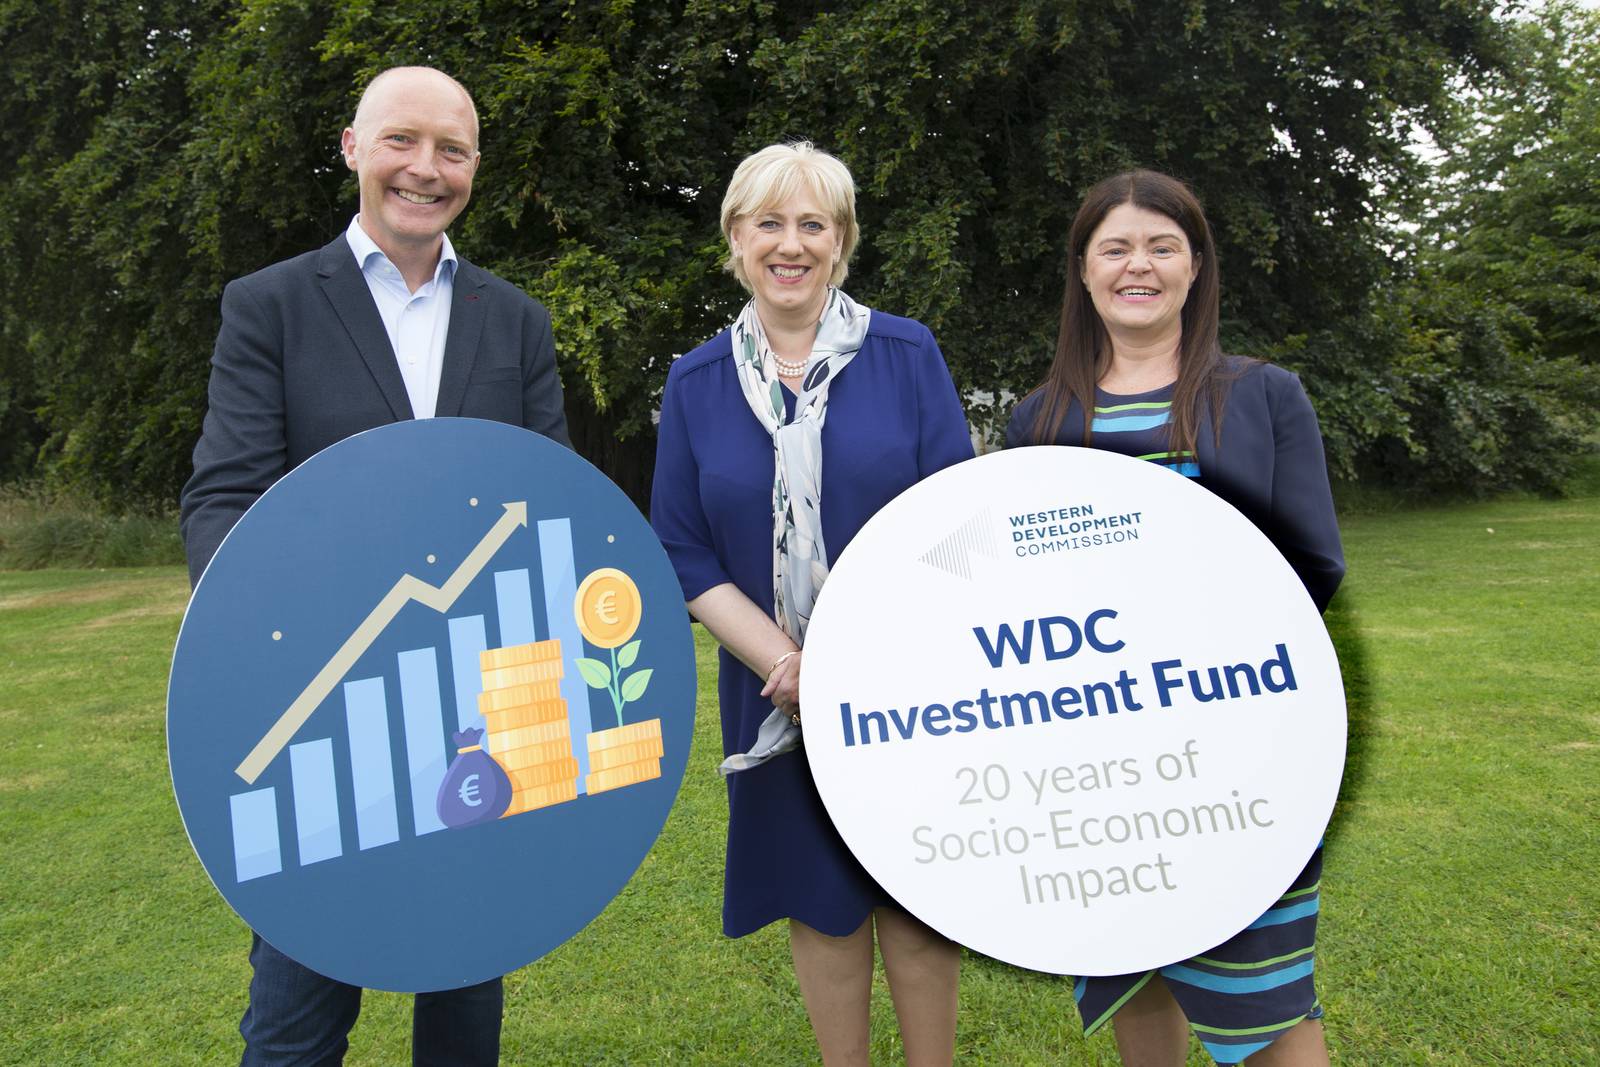 Western Development Commission chief executive Tomás Ó Síocháin, Minister for Rural and Community Development, Heather Humphreys and Western Investment Fund manager Gillian Buckley